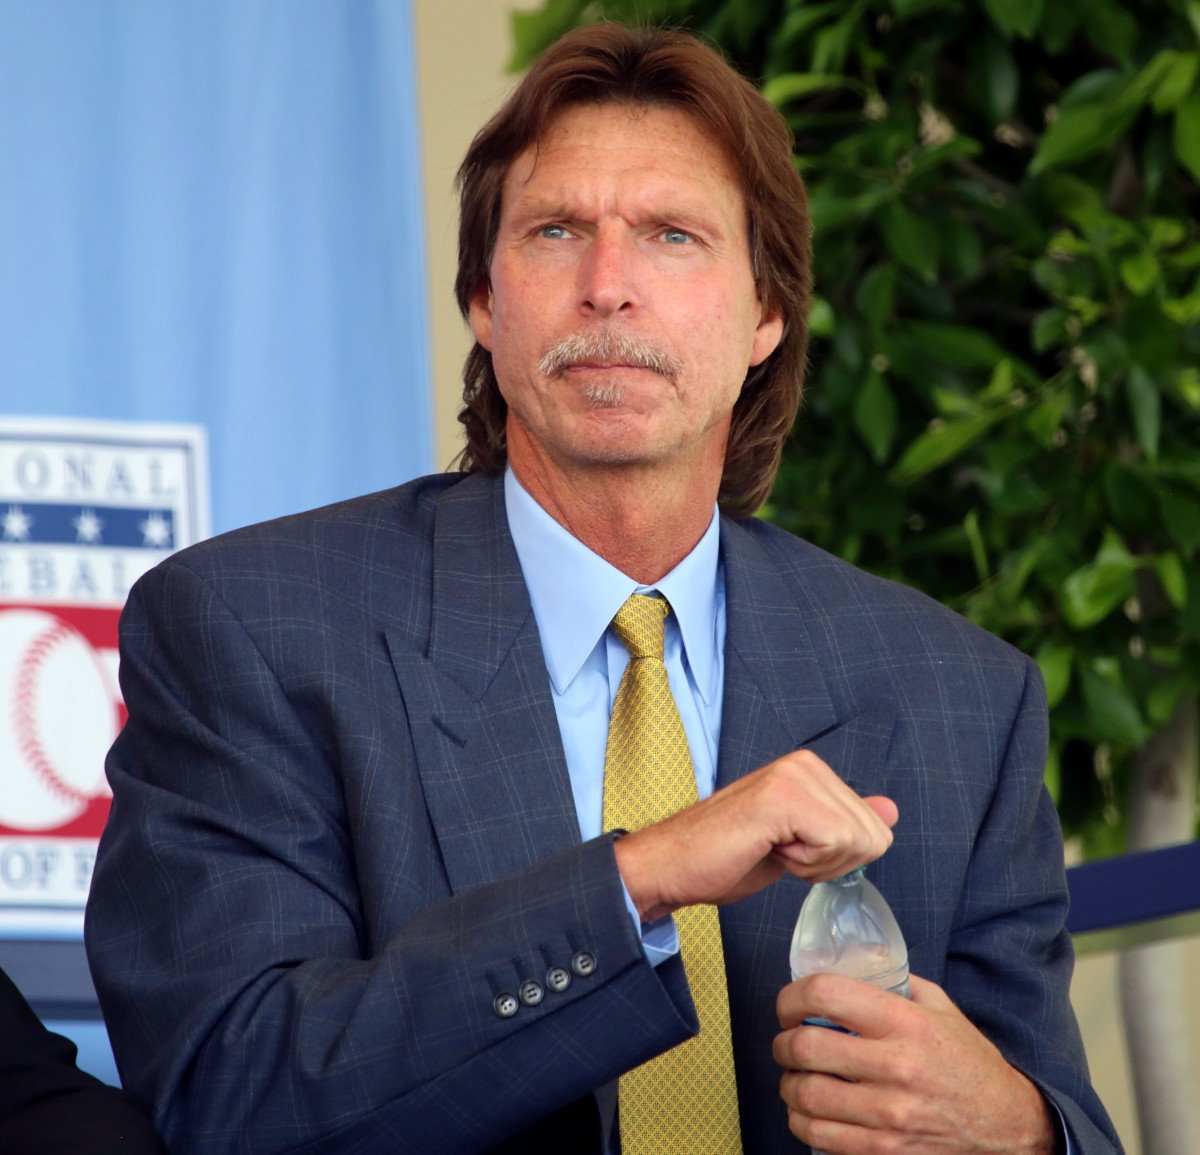 Former Seattle Mariners ace Randy Johnson prepares to speak at his induction to the Baseball Hall of Fame in 2015.